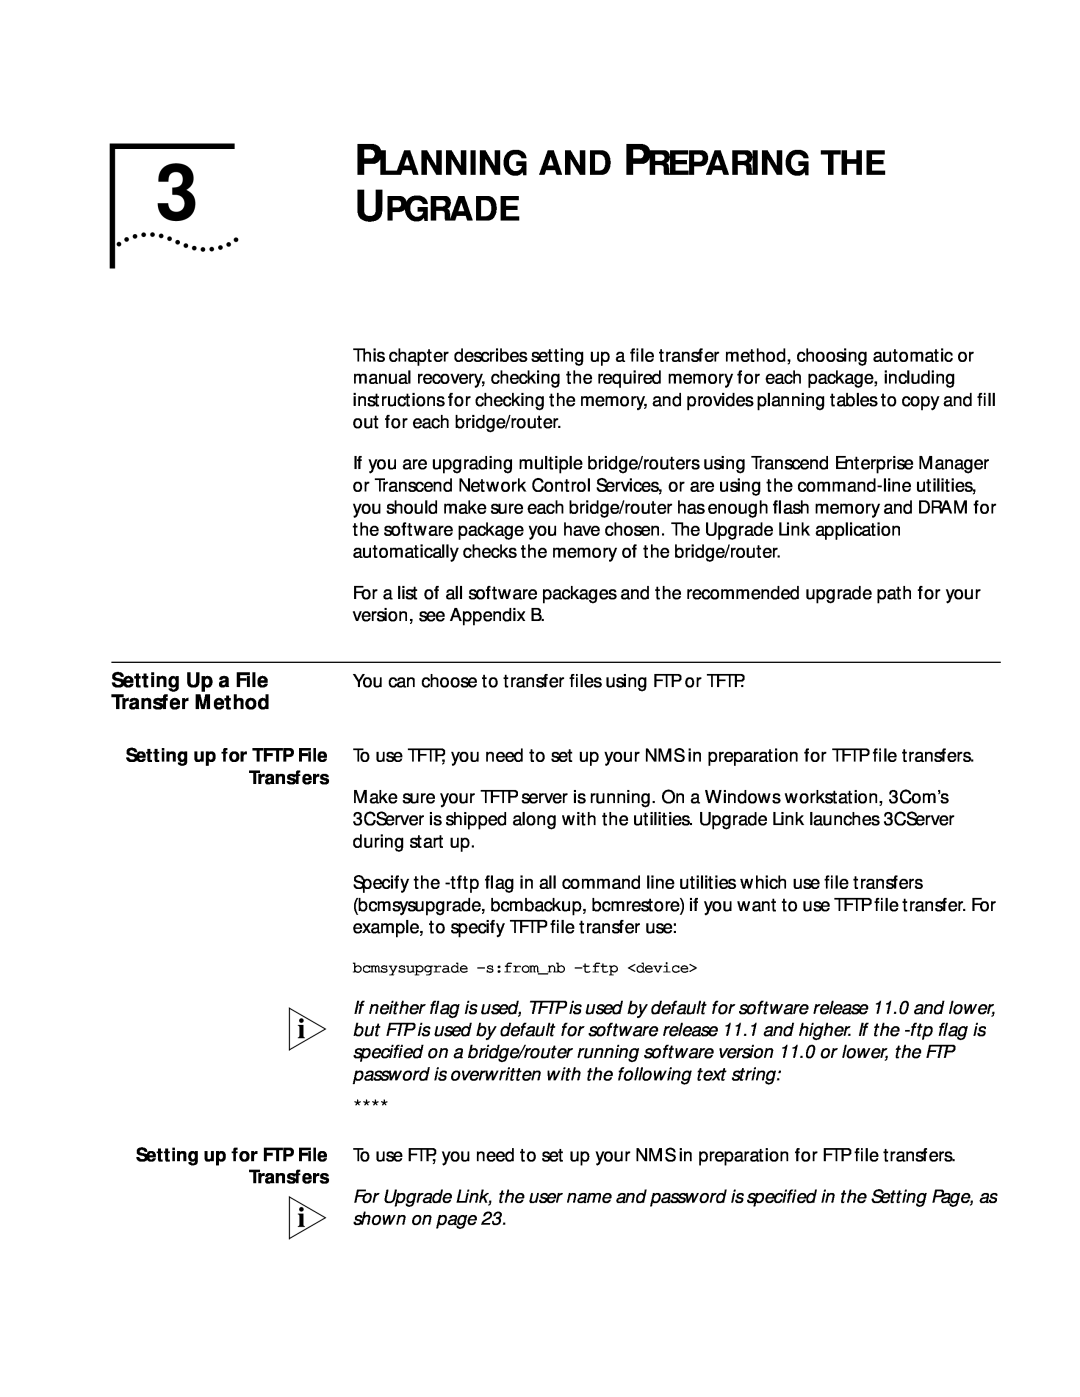 3Com ENTERPRISE OS 11.3 manual PLANNING AND PREPARING THE 3 UPGRADE, Setting Up a File, Transfer Method 